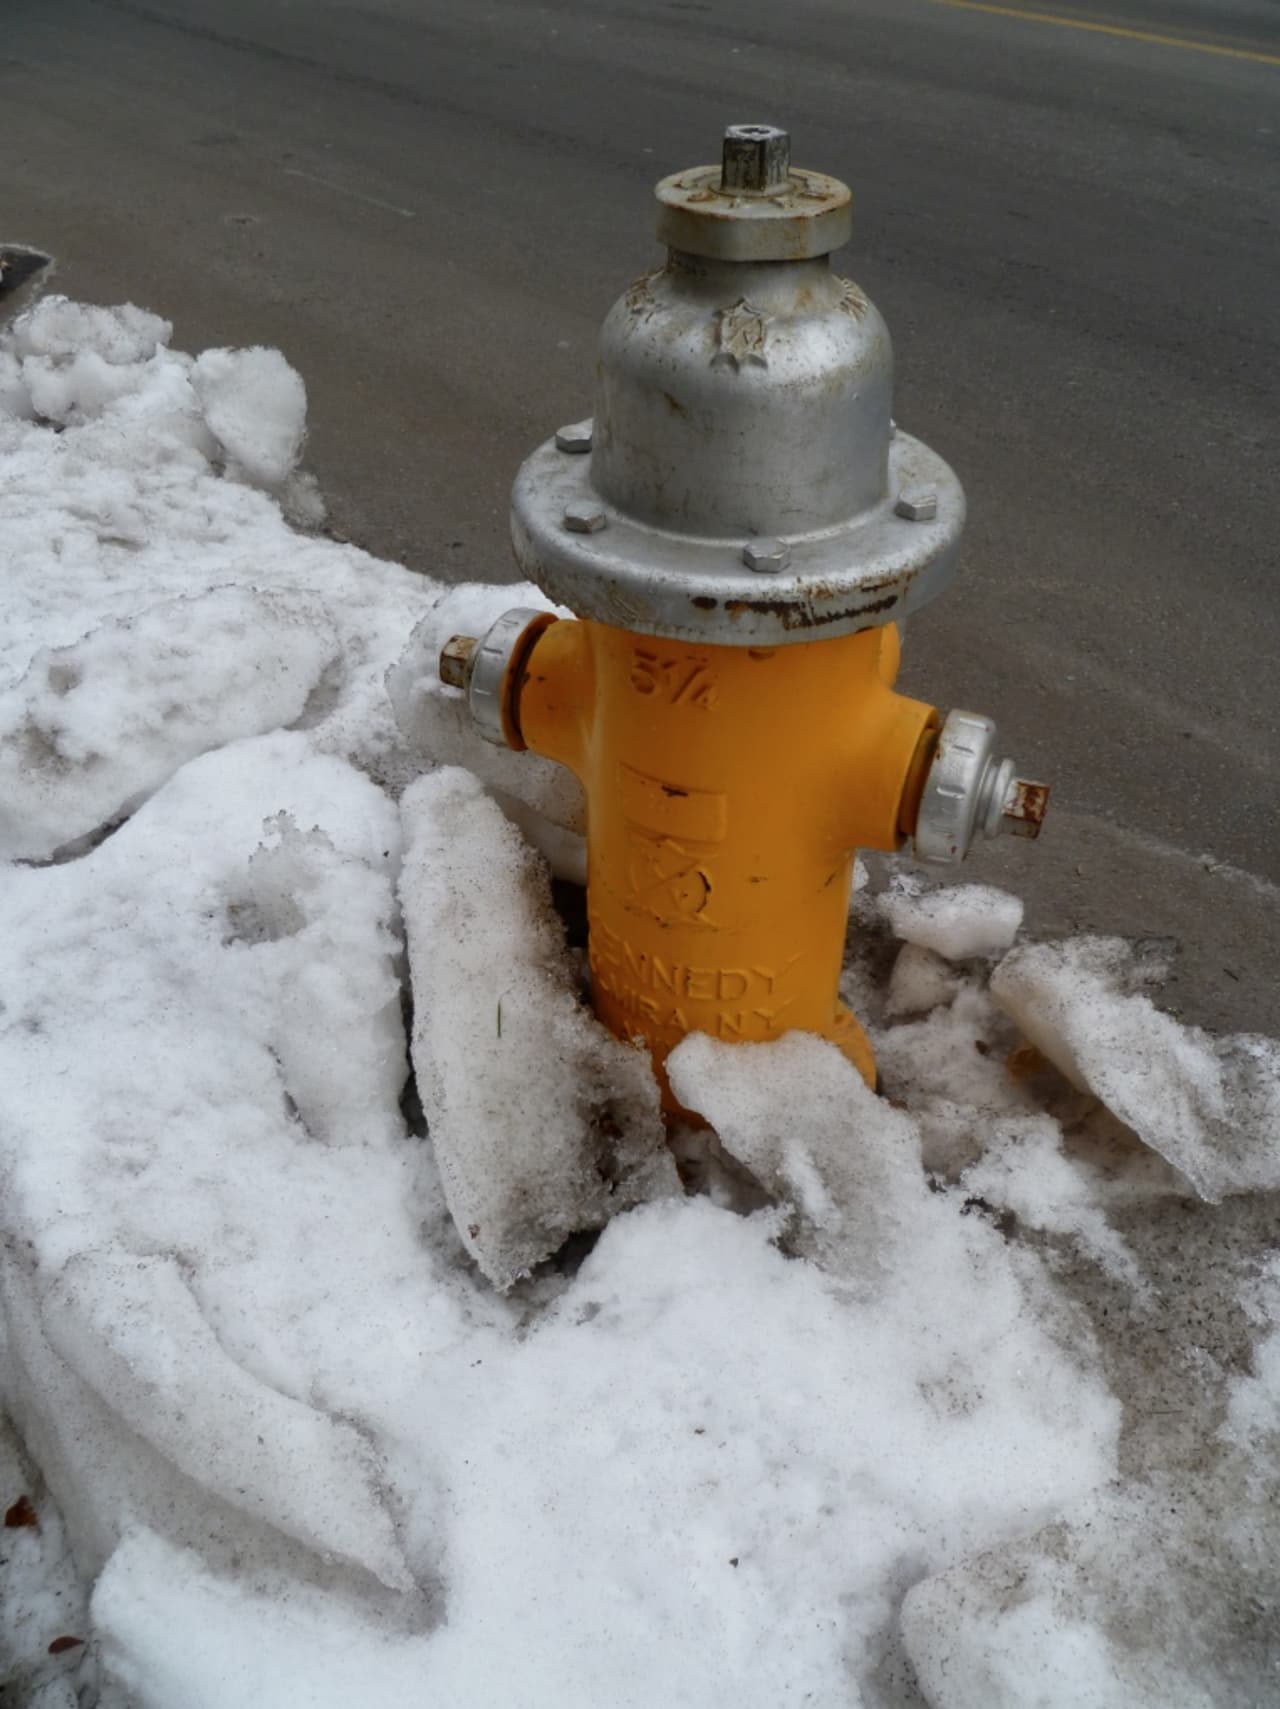 The Norwalk Fire Department is asking residents to participate in Adopt-A-Hydrant program by adopting a fire hydrant close to home or business and keep it free of snow during the winter.